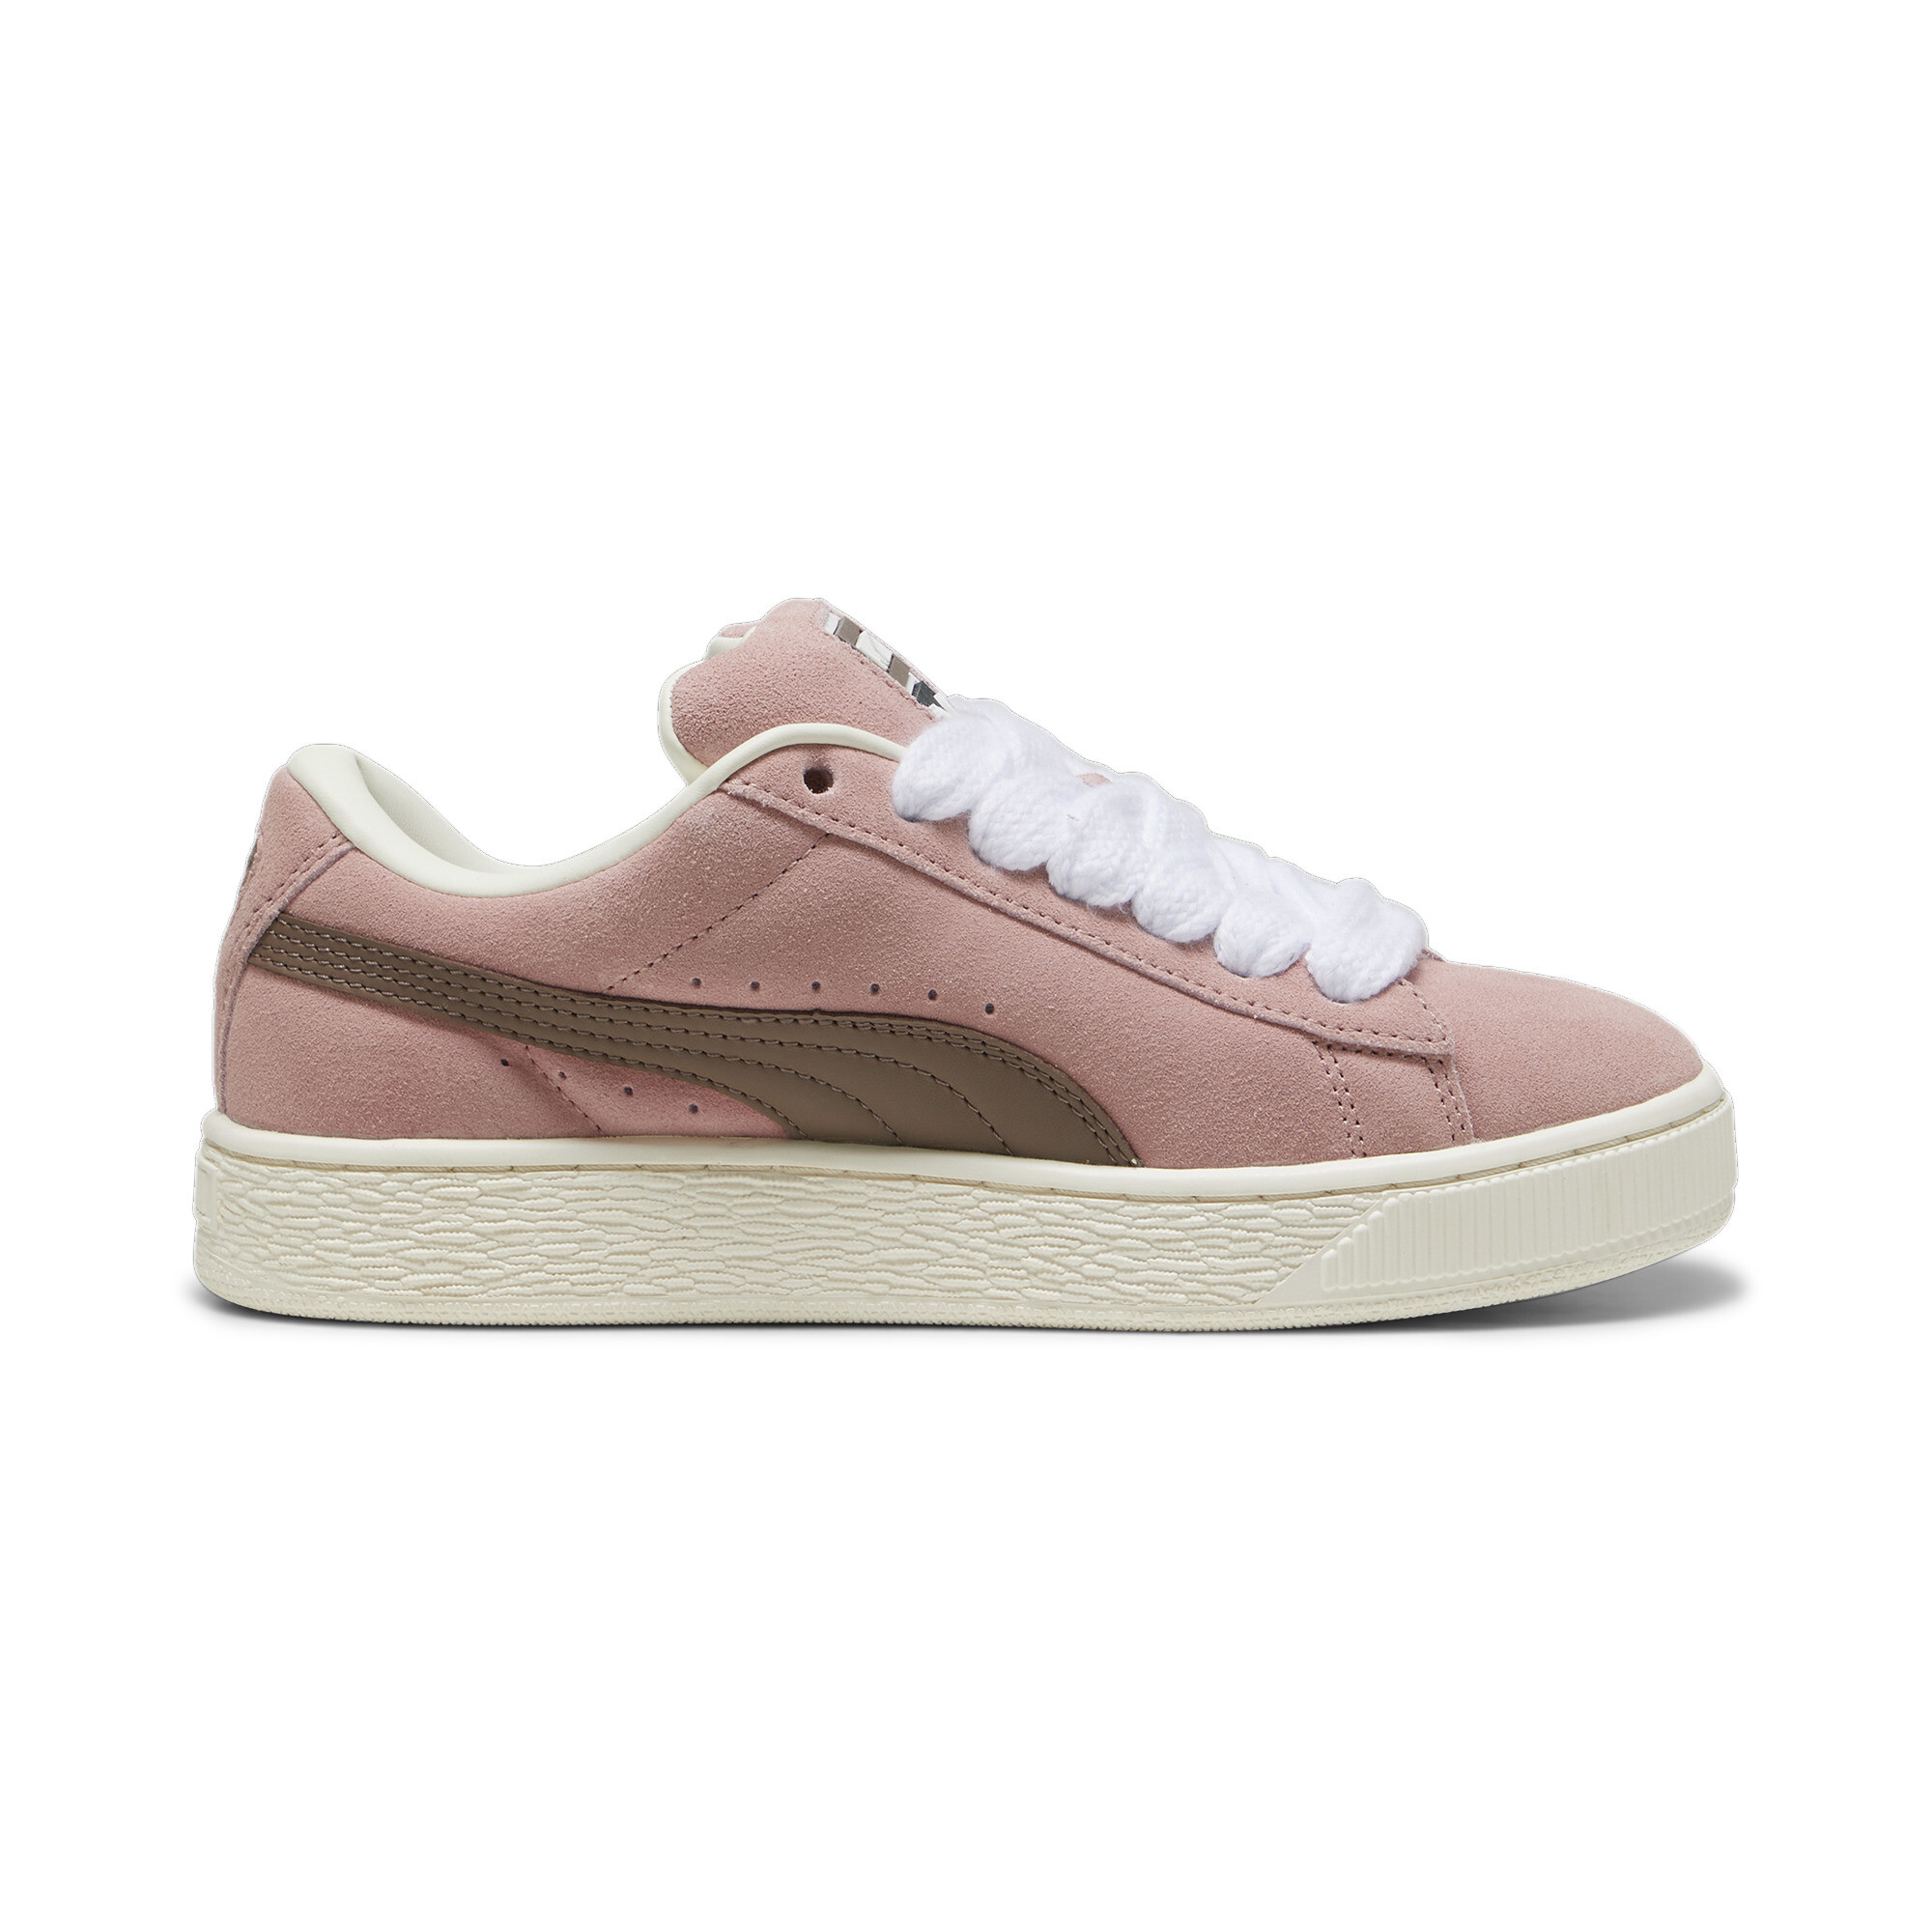 Puma Suede XL Sneakers Unisex, Pink, Size 42, Shoes